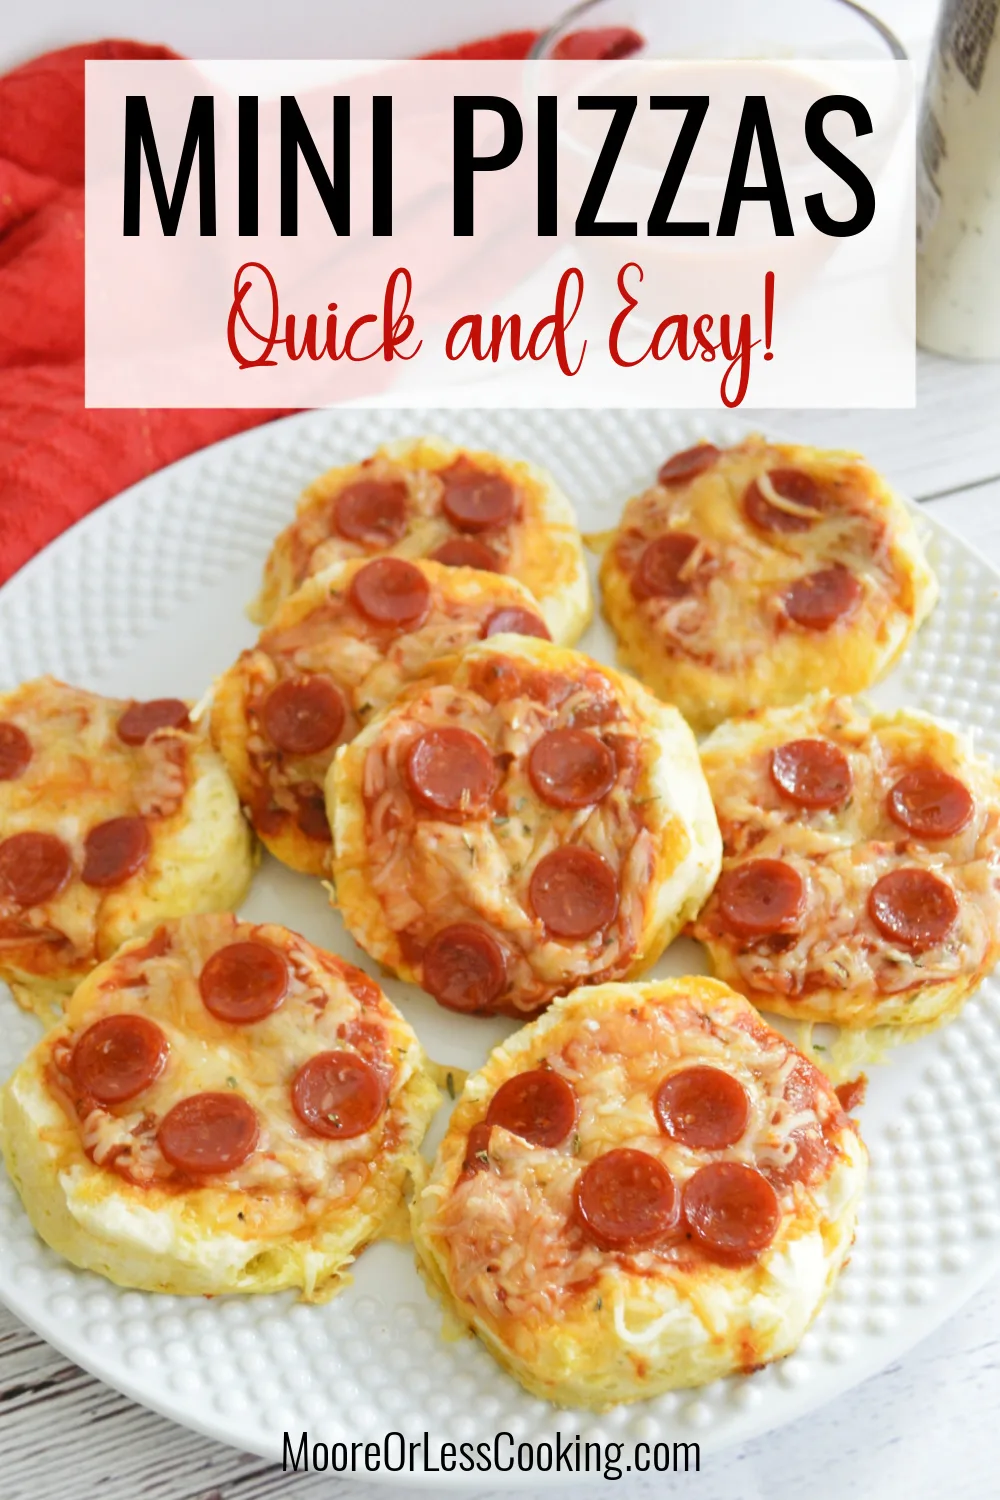 Quick and easy, these mini pizzas are perfect for snacks, lunches, appetizers, or even family pizza nights! Refrigerated biscuits serve as individual crusts, so get all your favorite toppings ready to make these simple and savory mini pizzas. via @Mooreorlesscook